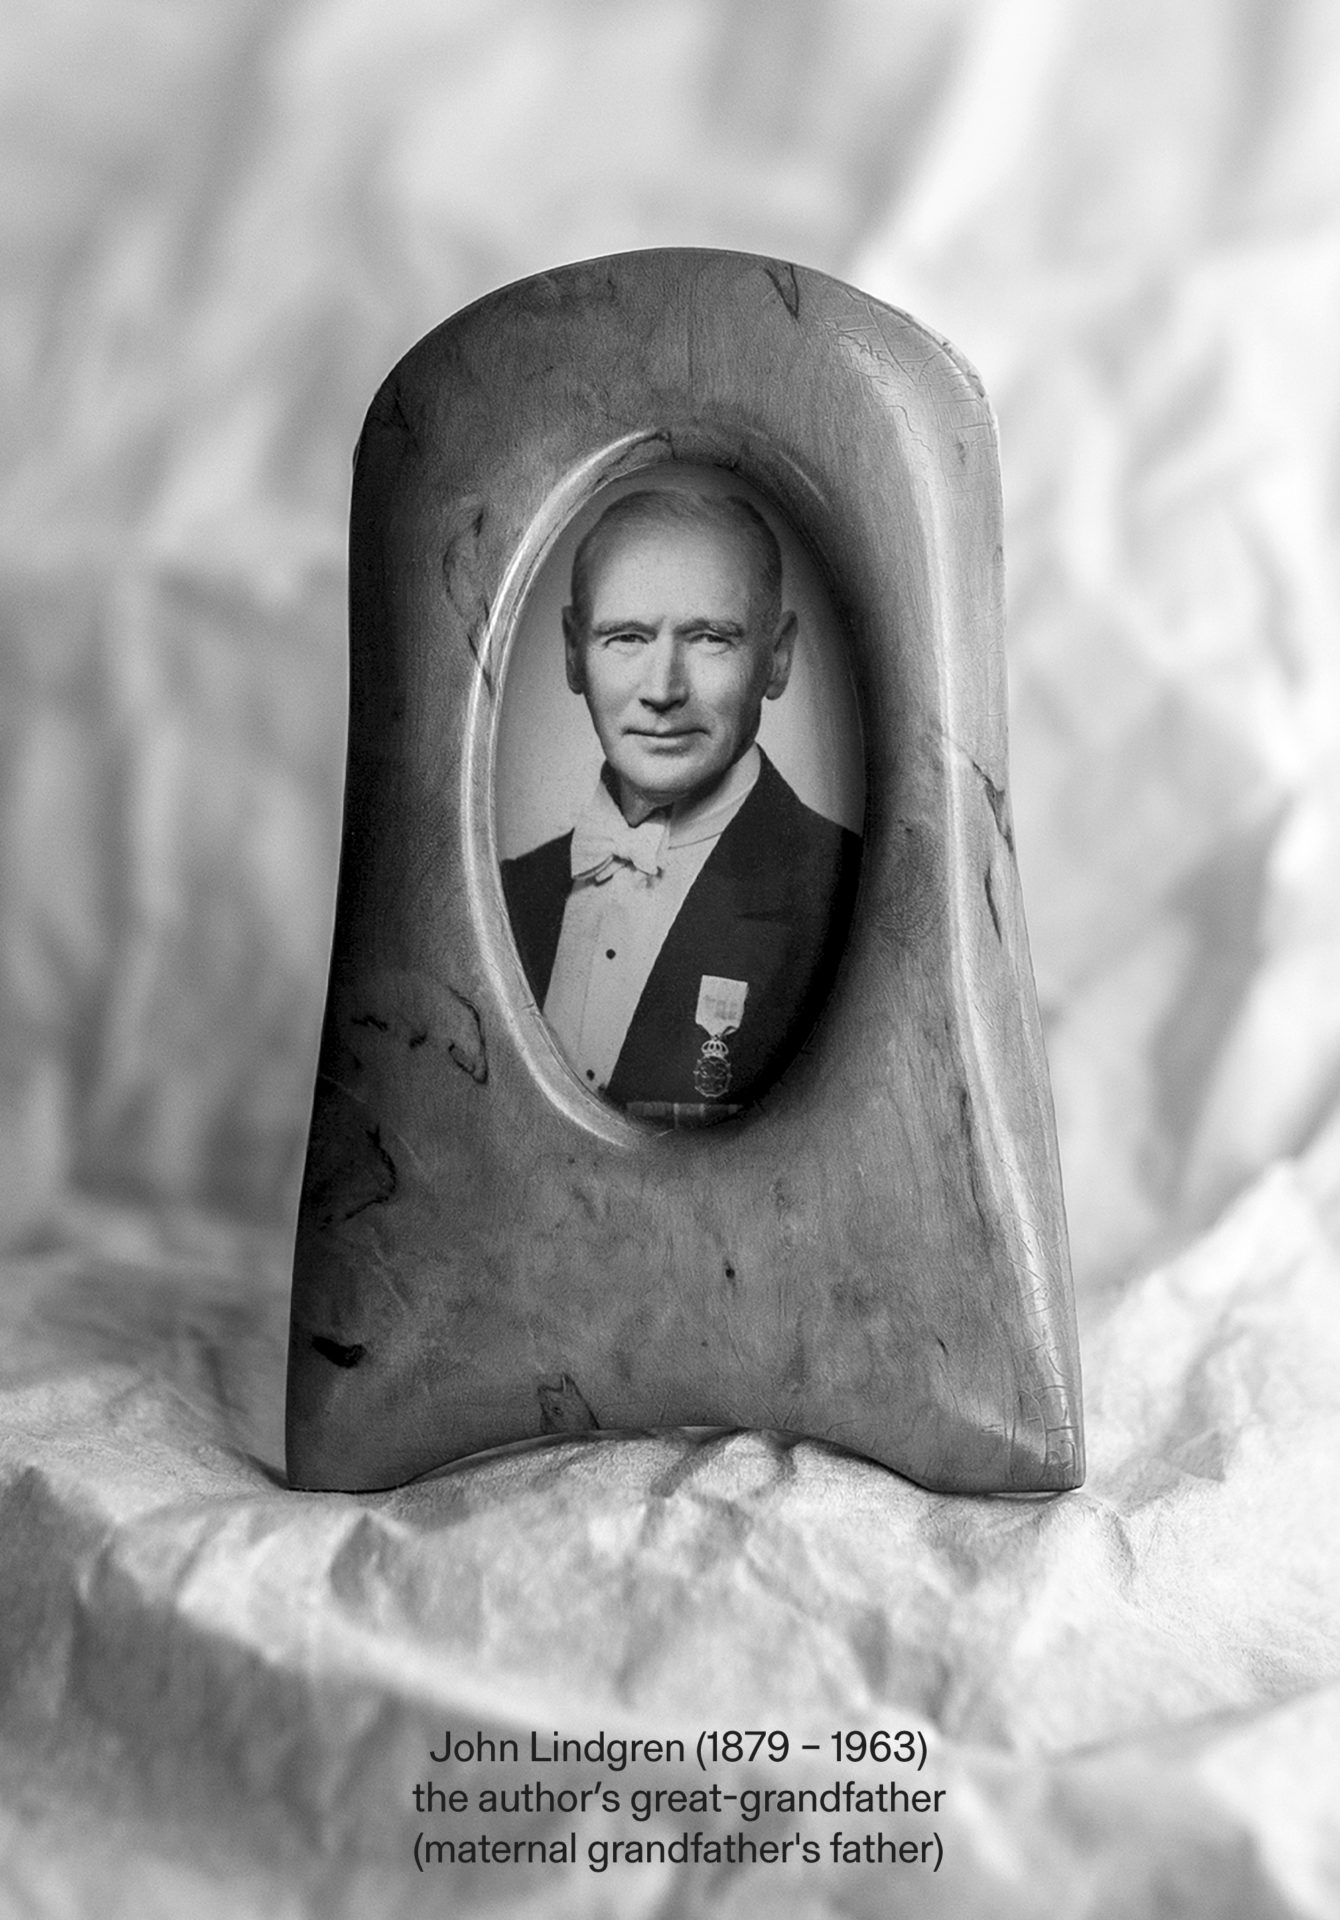 portrait of Carl June's great-grandfather (maternal grandfather's father) John Lindgren (1879 - 1963) In White Tie With Decorations, n.d. Stockholm. b/w photograph in a linden wood frame